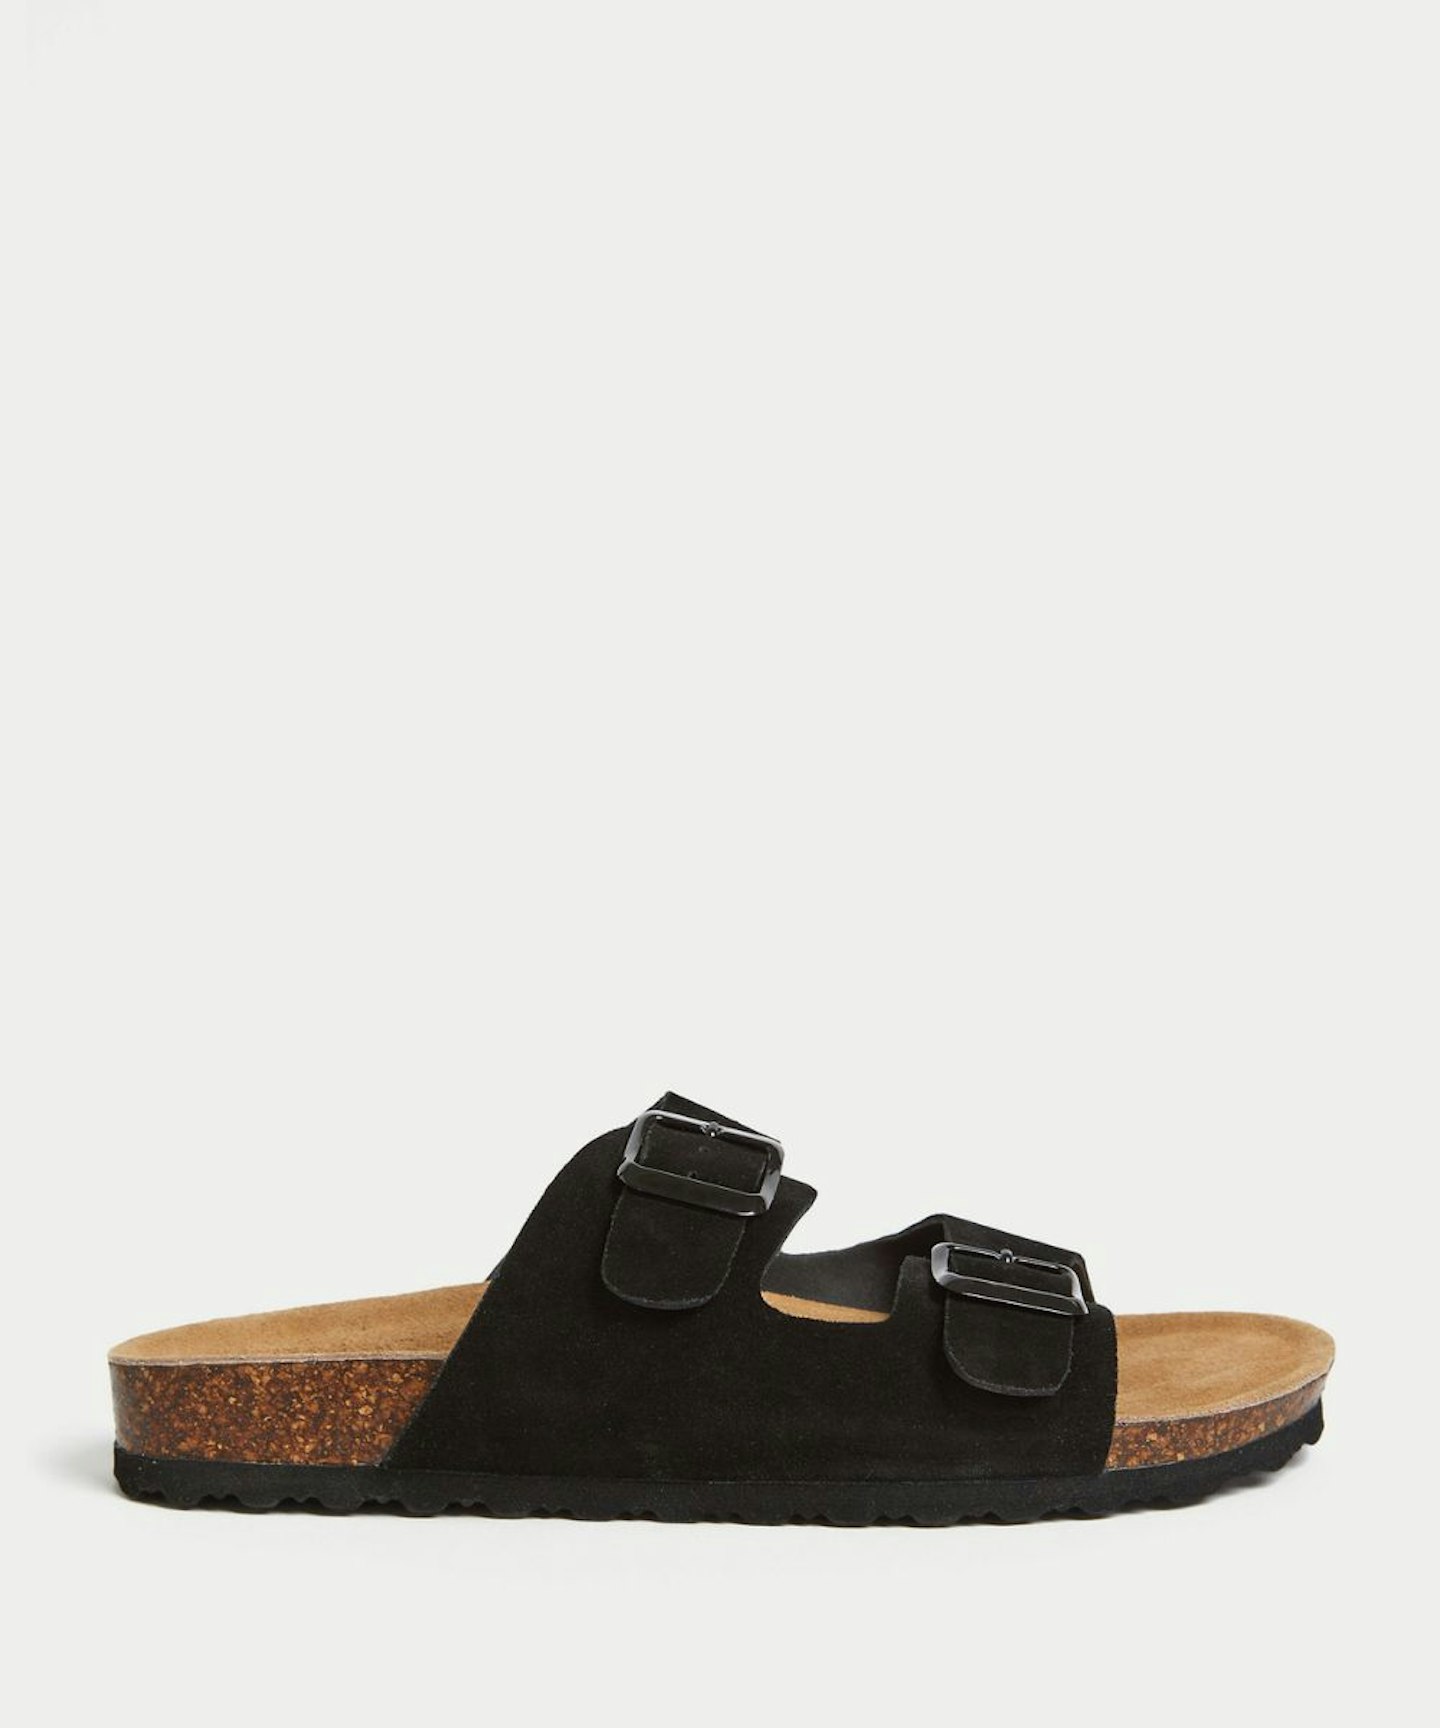 M&S, Suede Buckle Footbed Mules